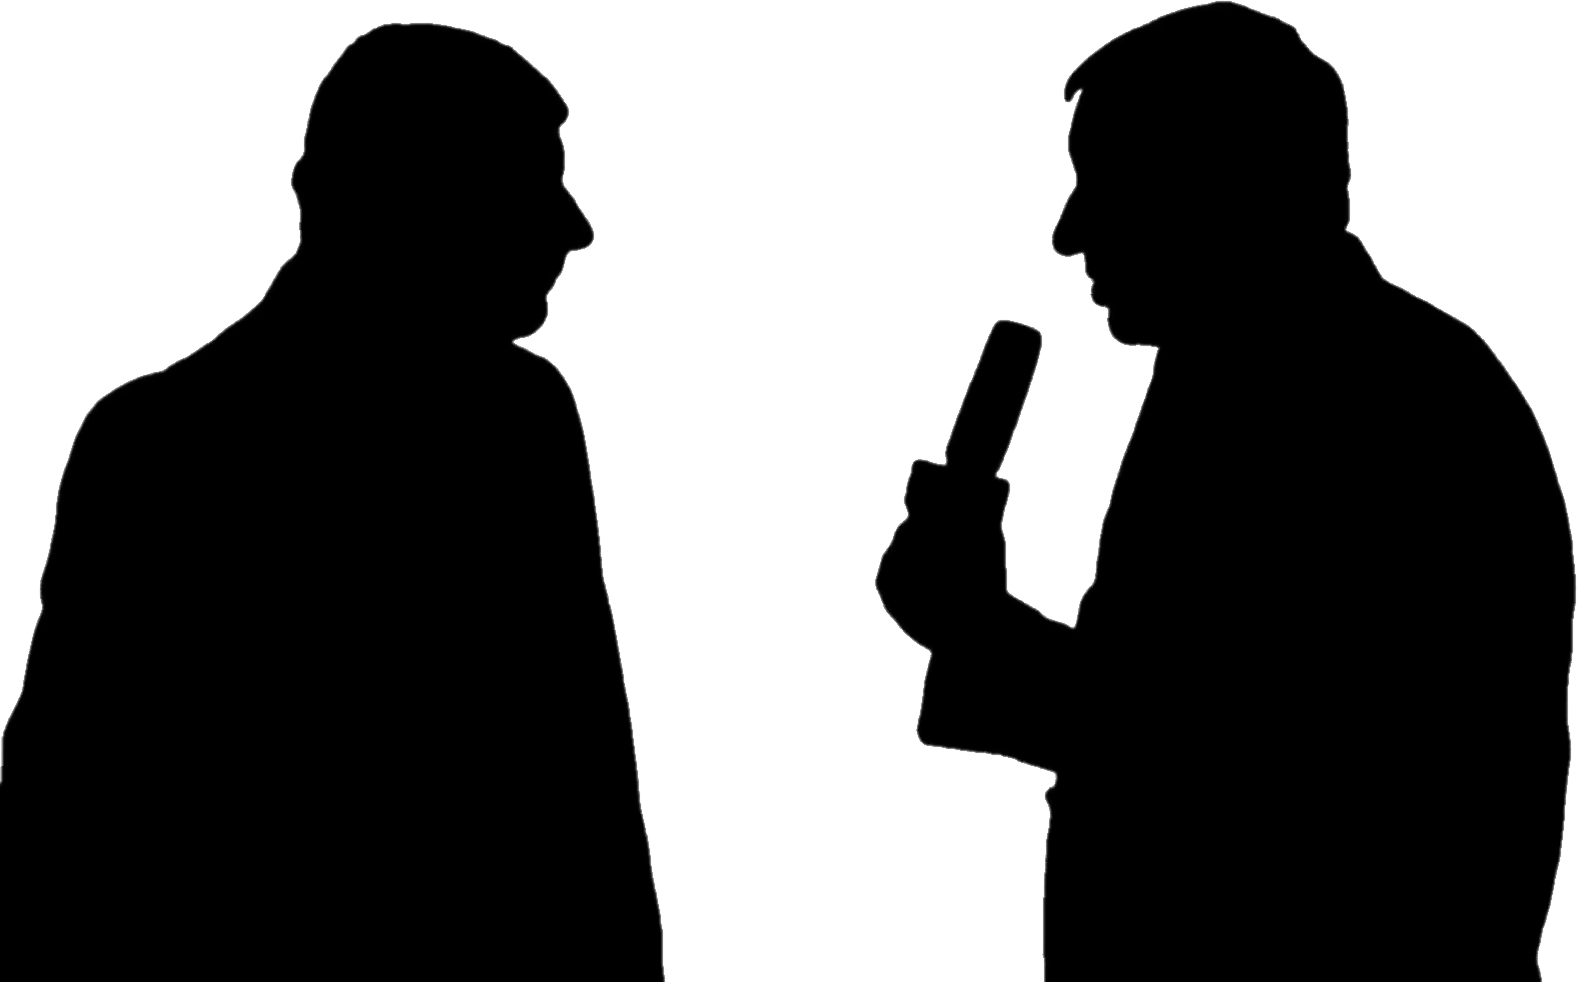 Silhouette Of A Man Holding A Microphone And Talking To Another Man